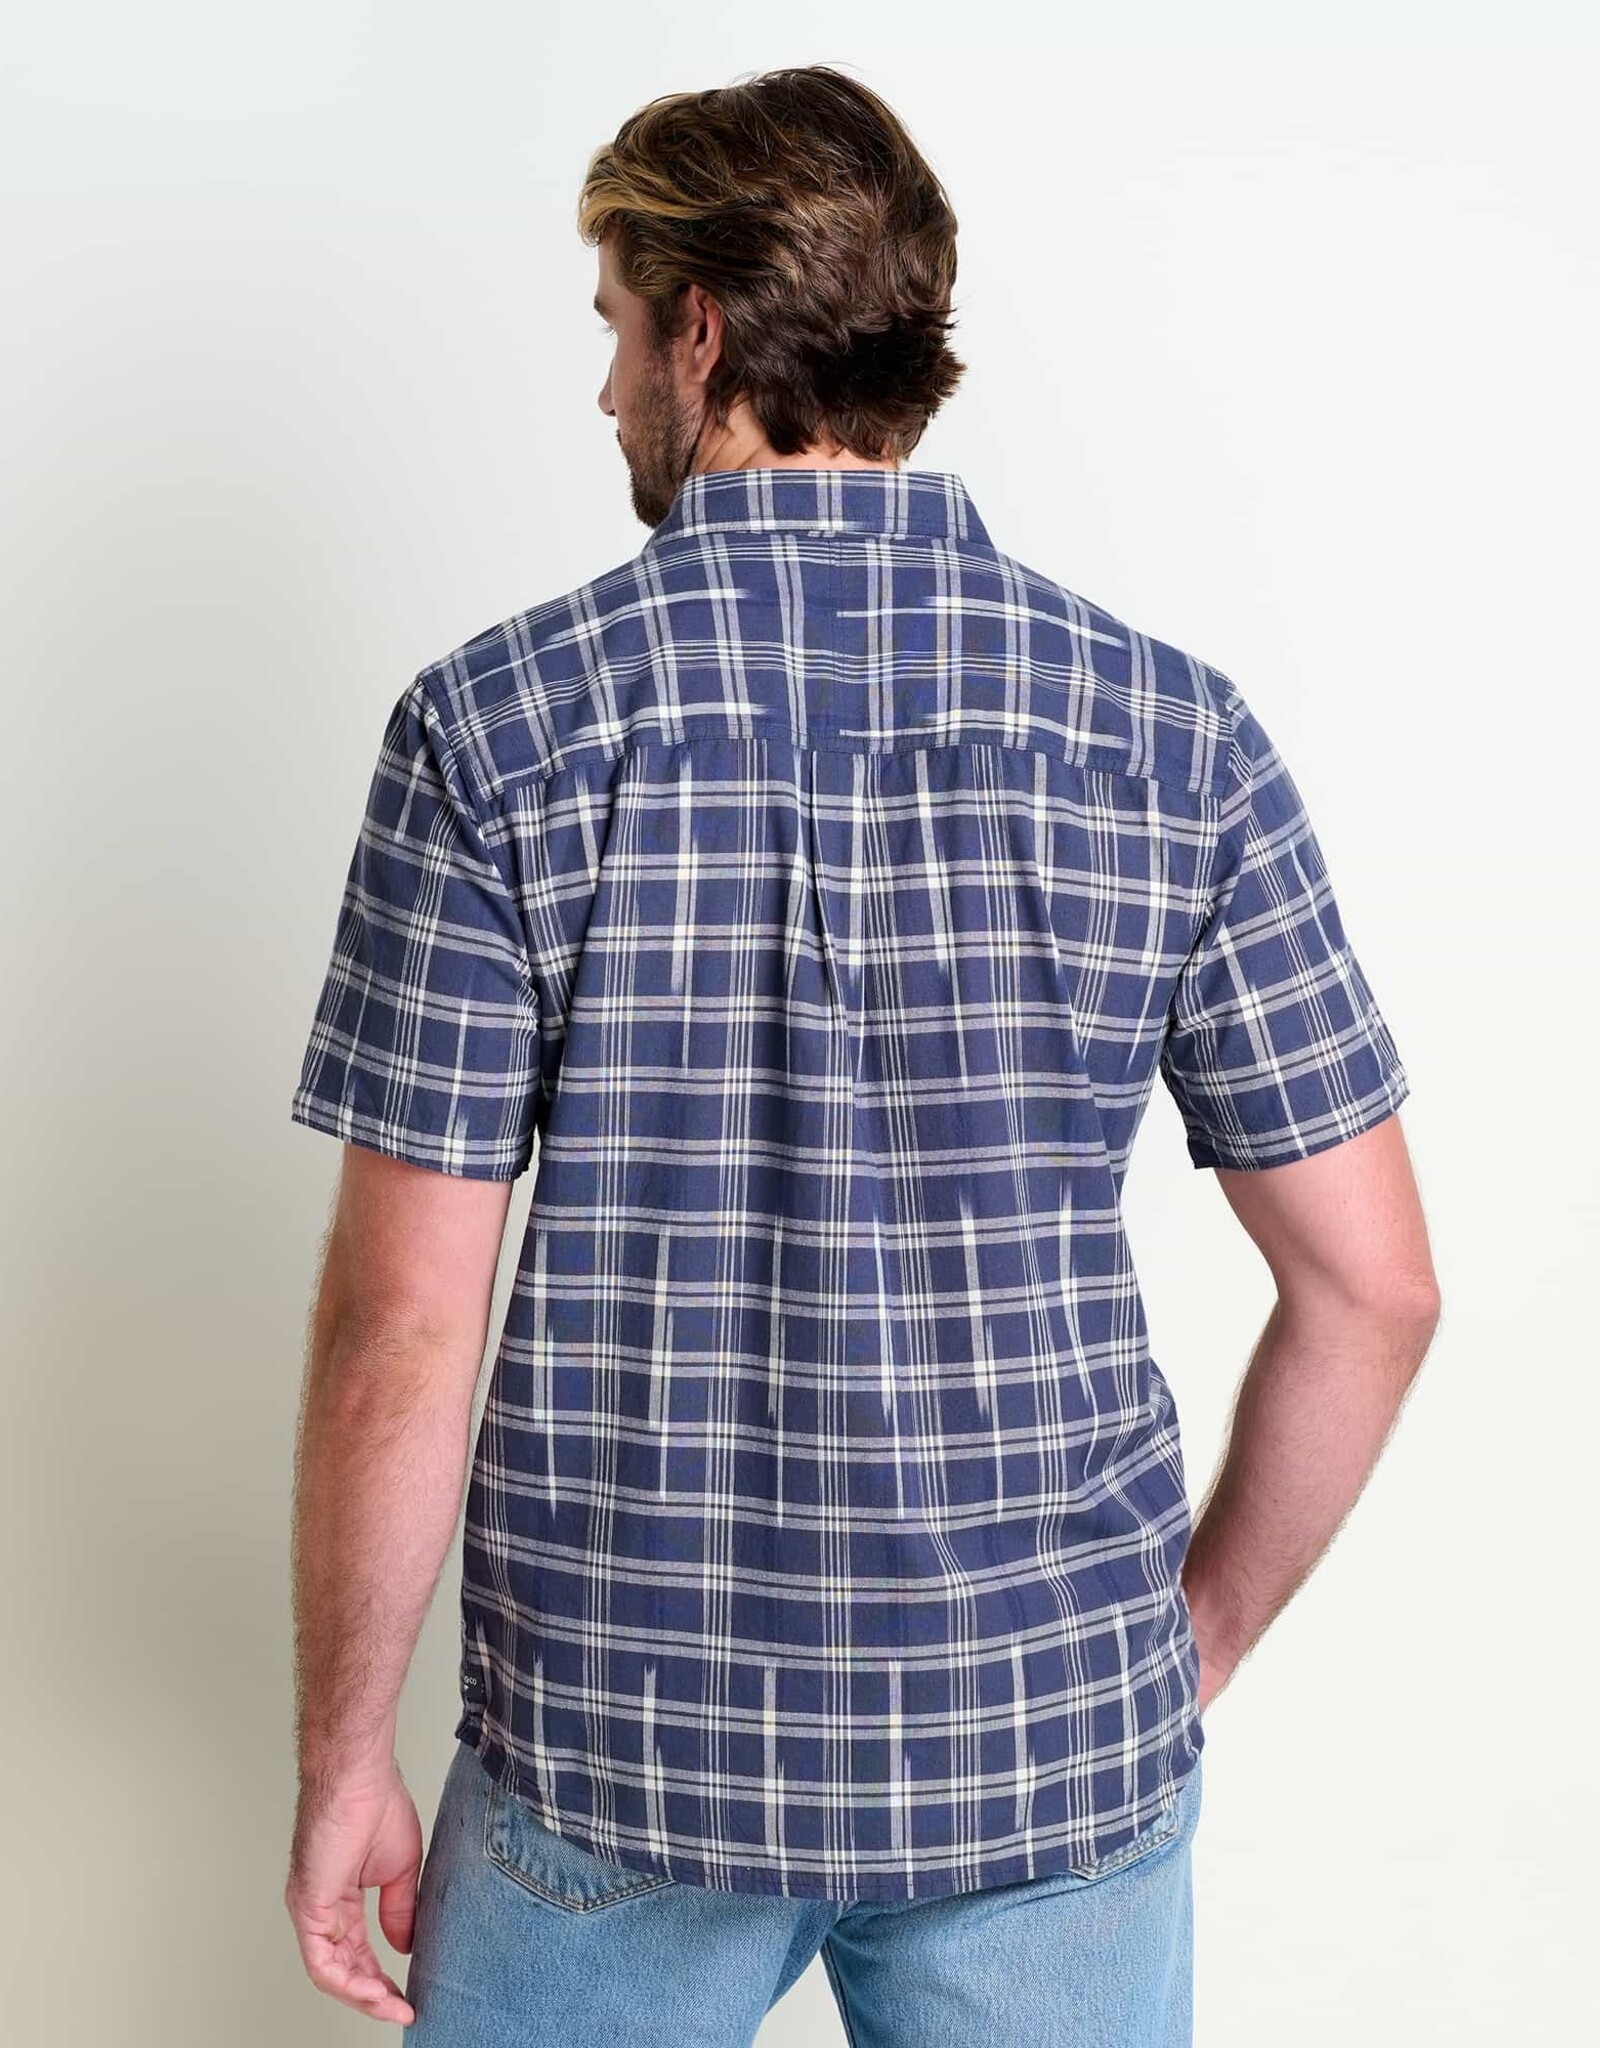 Toad&Co Smythy SS Shirt